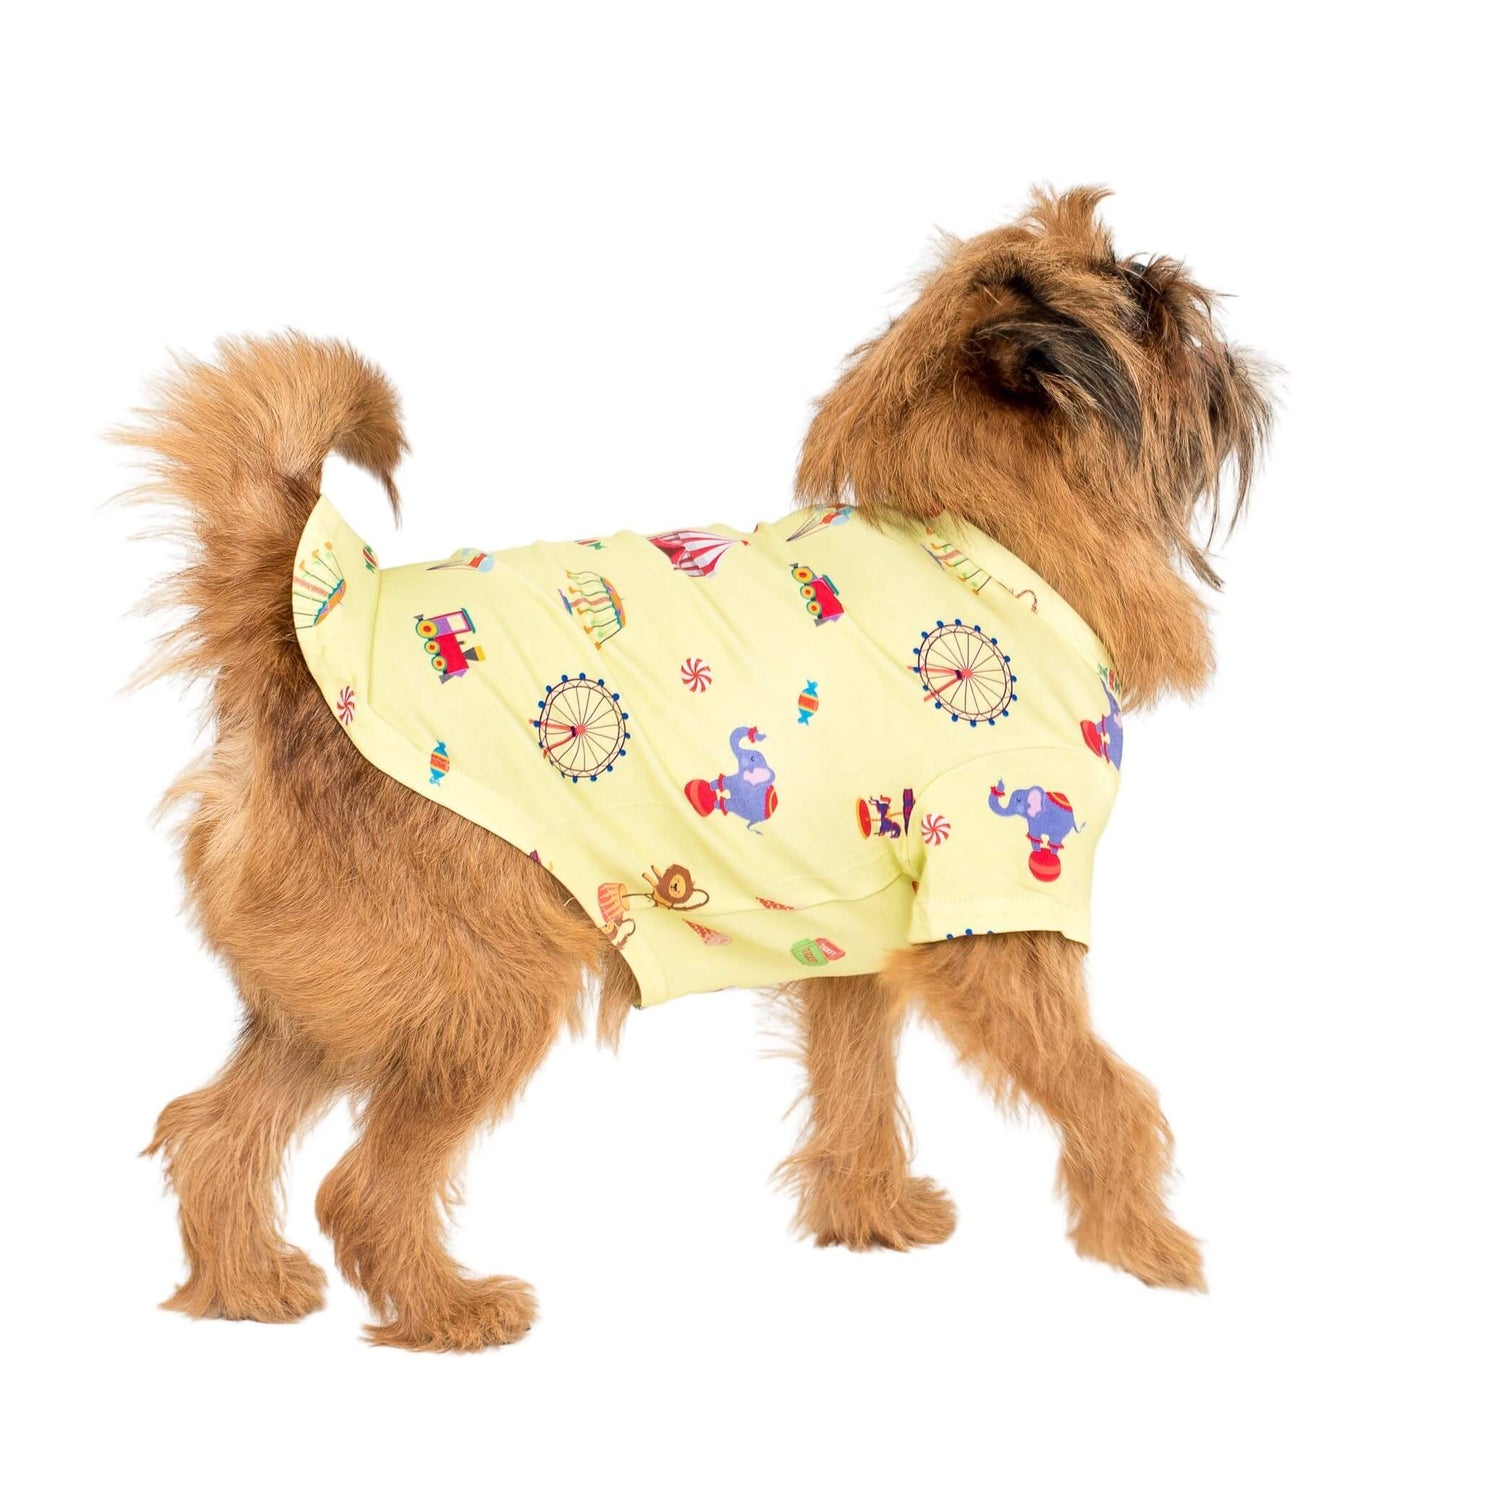 Gromit the Griffon standing rear on wearing a Vibrant Hound Admit one dog shirt. It has carnival theme printed on the dog clothing.